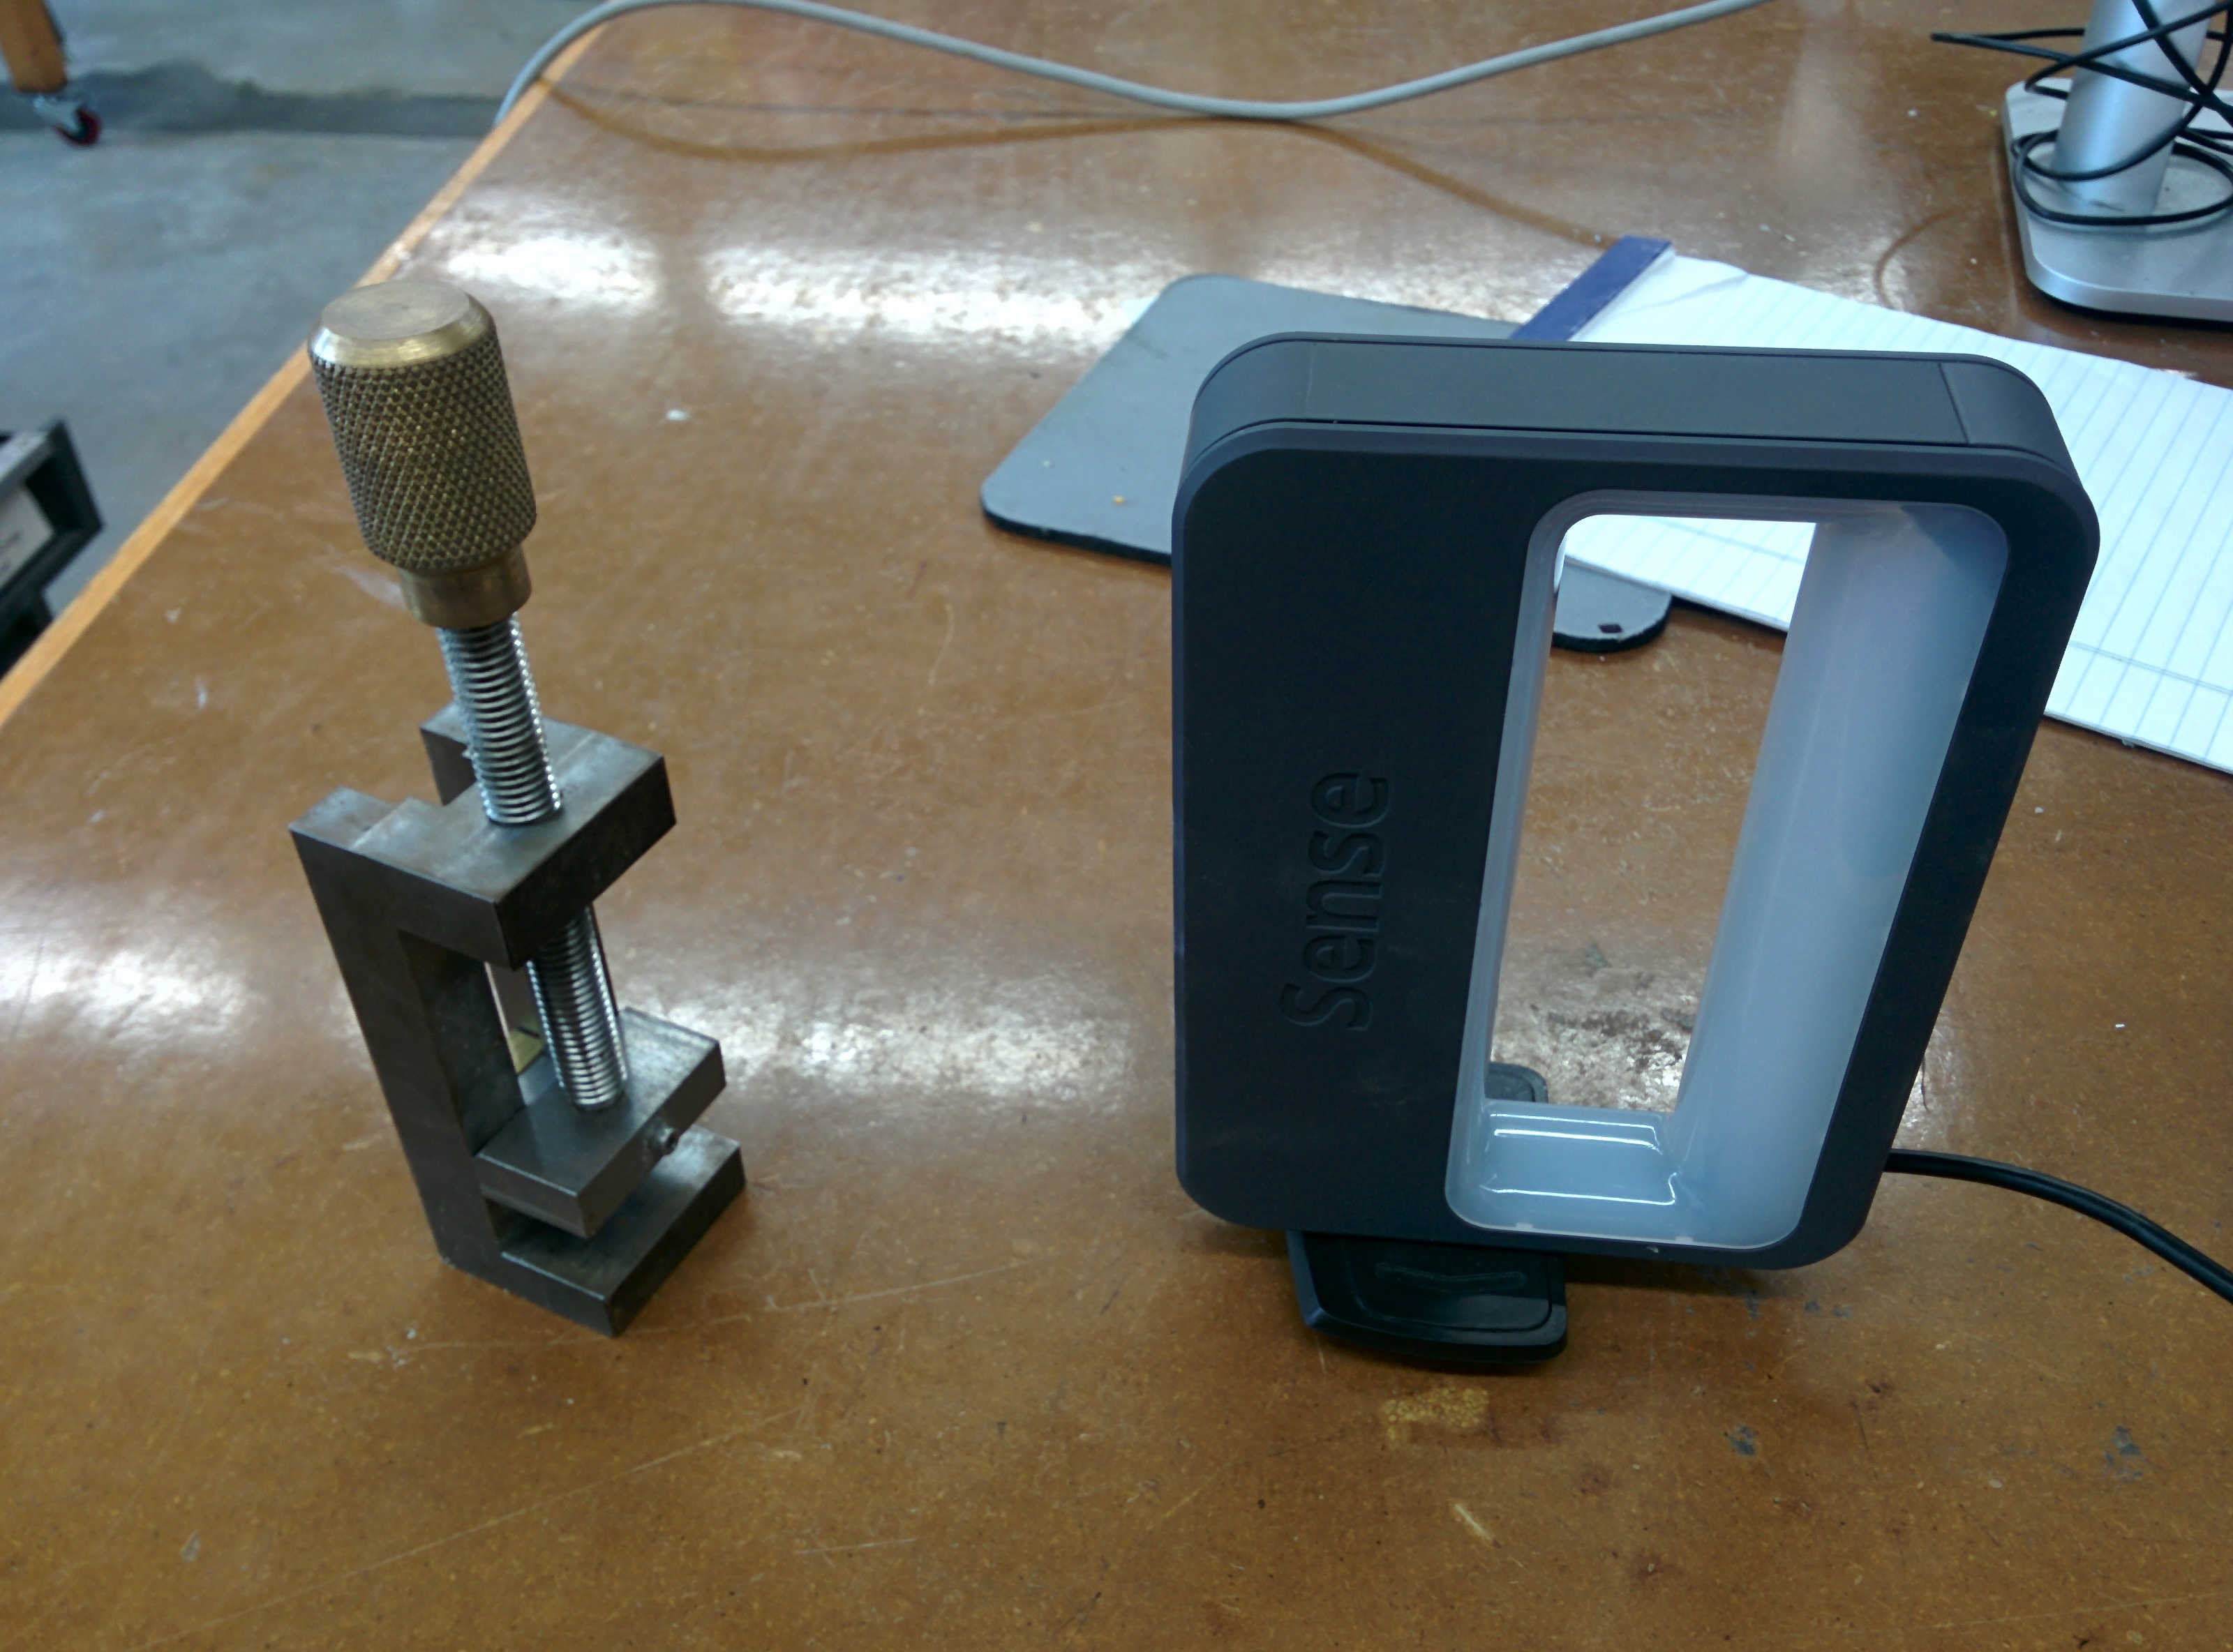 Clamp and Sense scanner